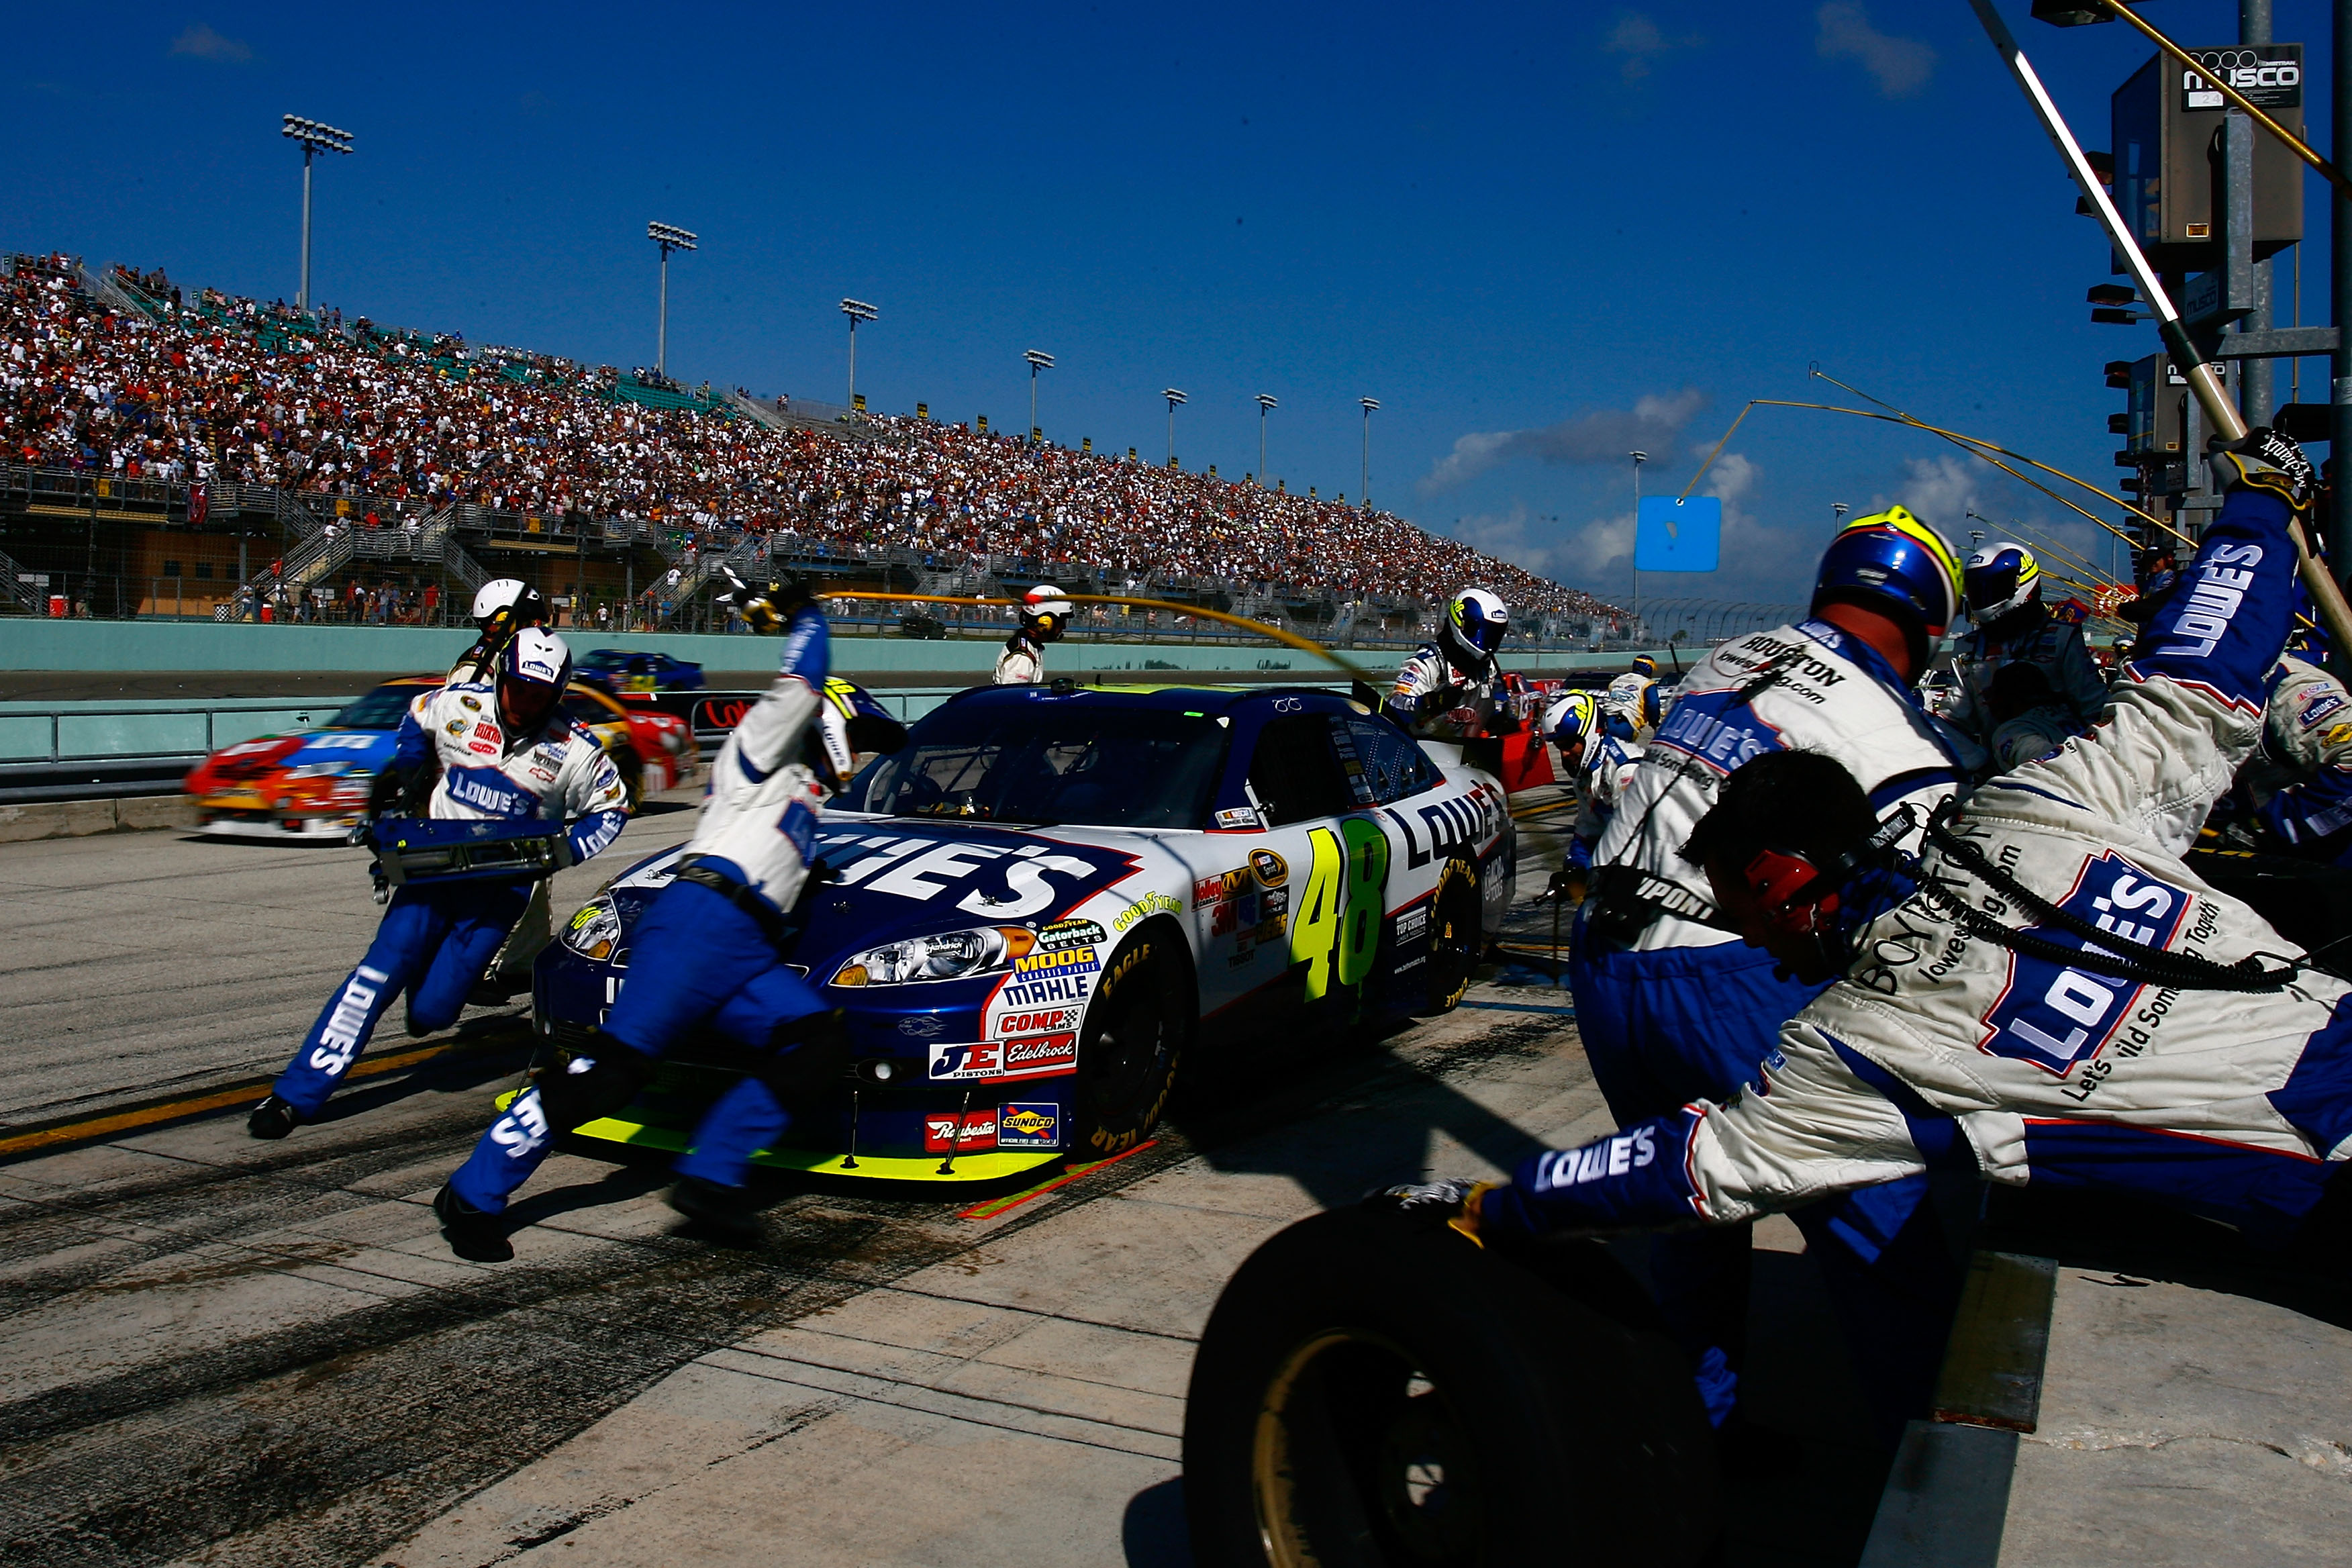 HOMESTEAD, FL - NOVEMBER 21:  Jimmie Johnson, driver of the #48 Lowe's Chevrolet, makes a pit stop during the NASCAR Sprint Cup Series Ford 400 at Homestead-Miami Speedway on November 21, 2010 in Homestead, Florida.  (Photo by Jason Smith/Getty Images for